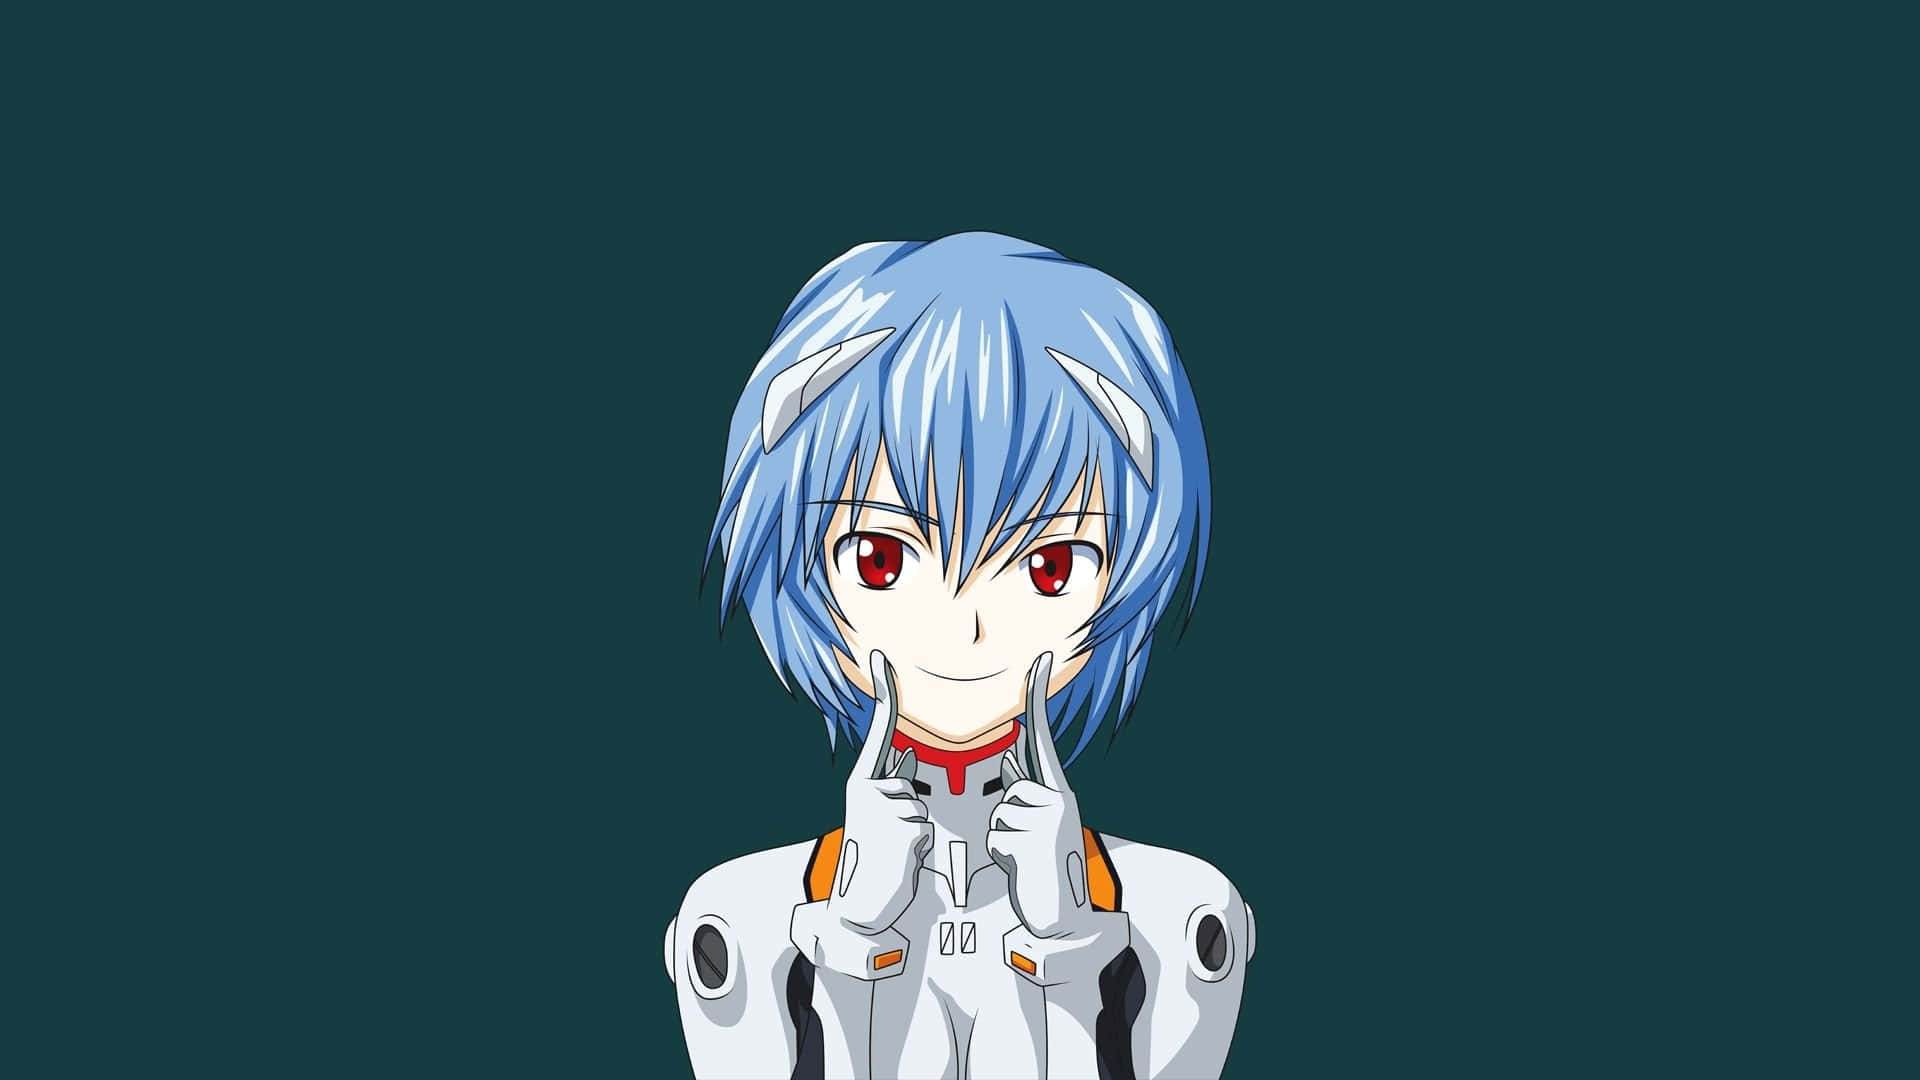 Rei Ayanami - Beautiful Stance In The Iconic Blue Jumpsuit